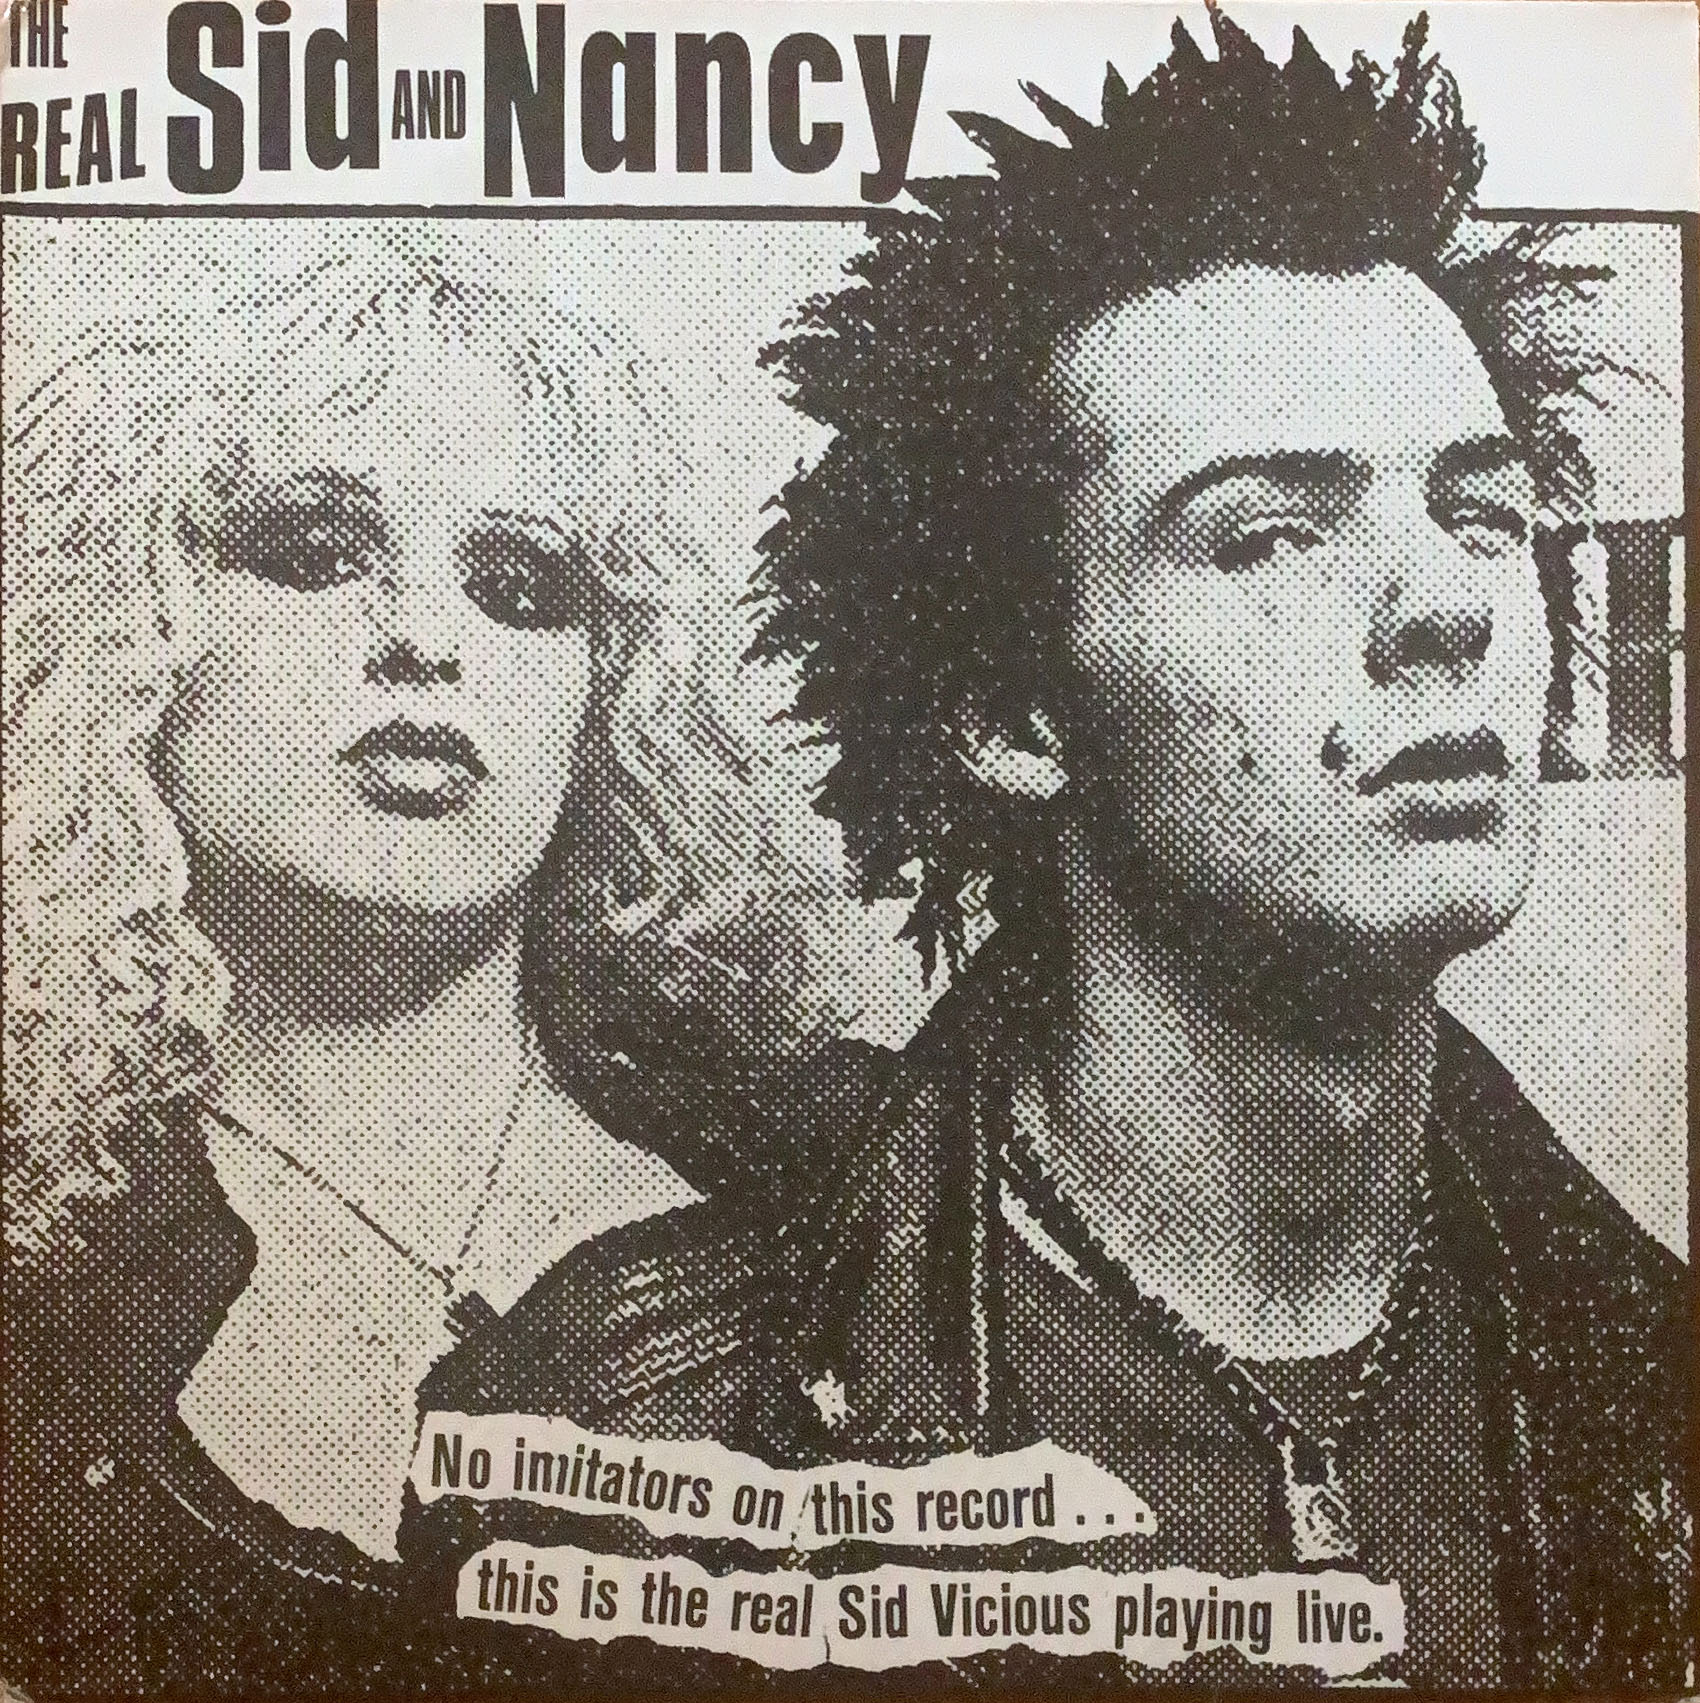 The Real Sid And Nancy [LP]